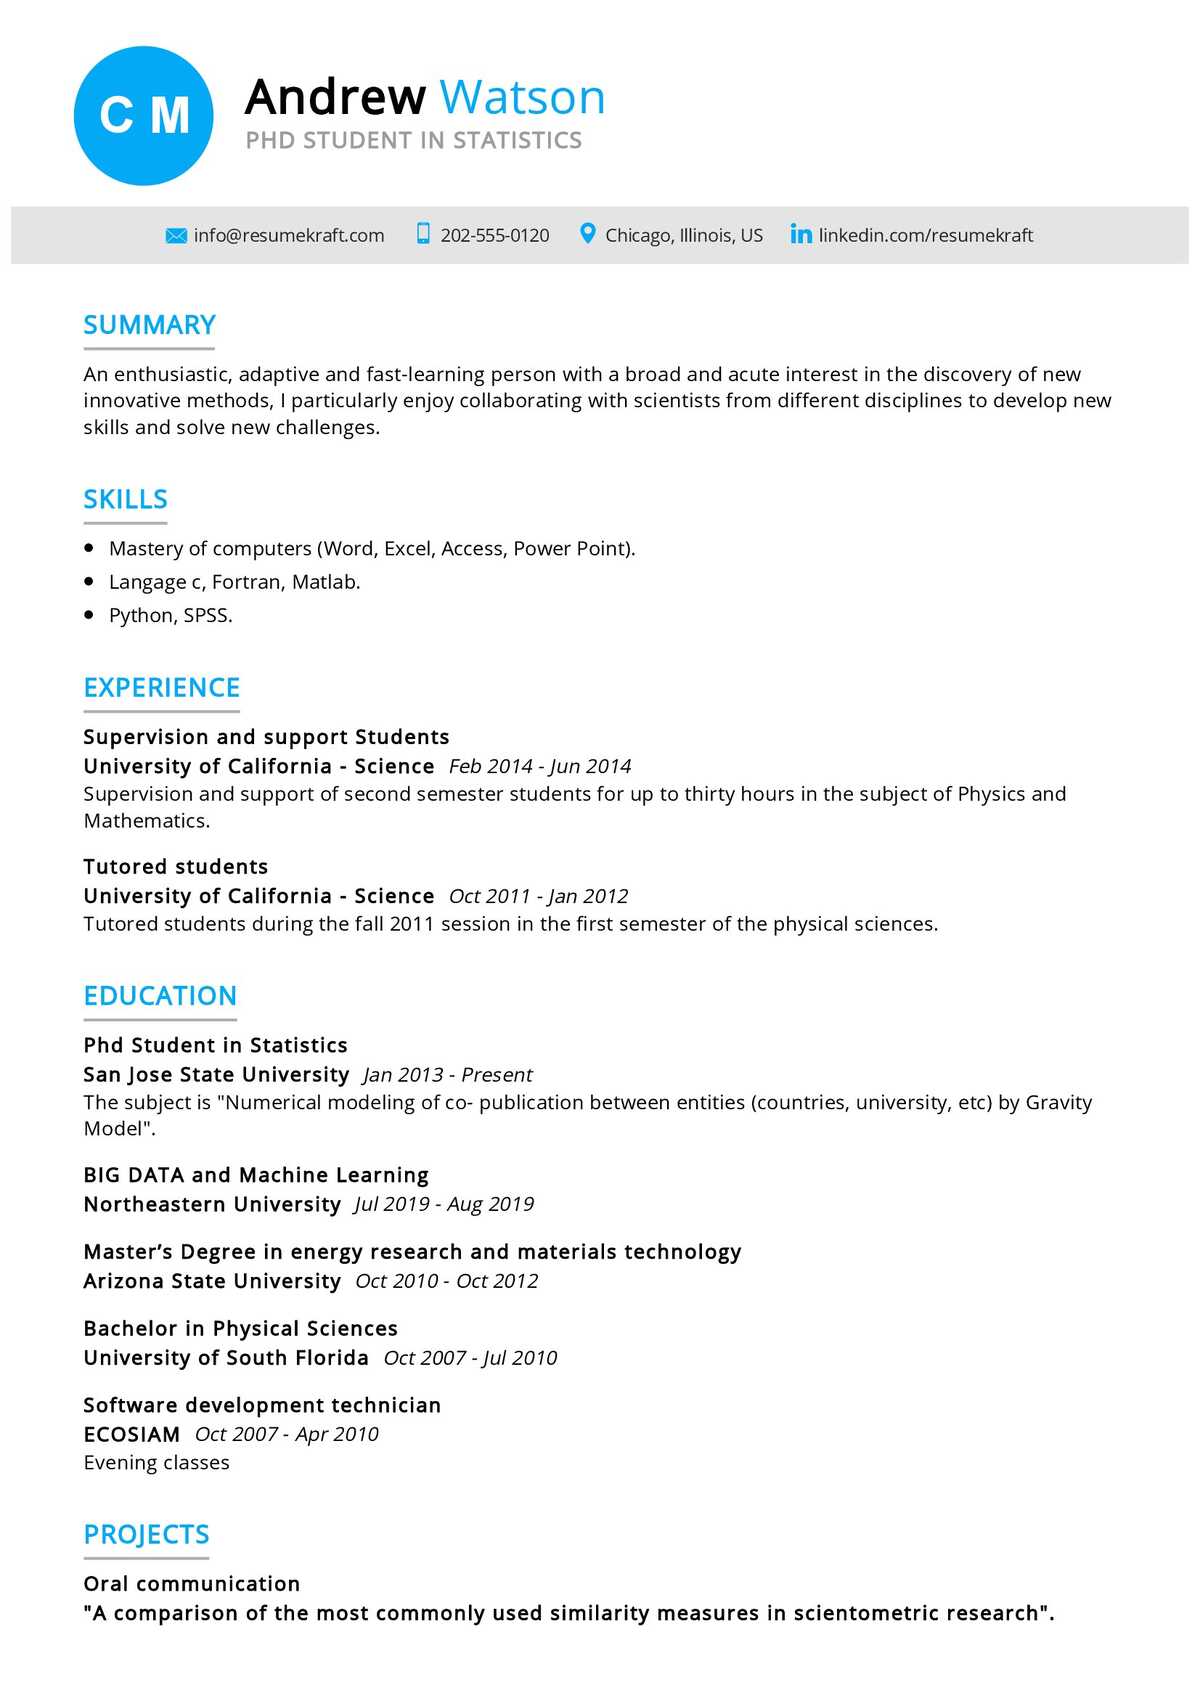 PhD Resume—Examples and 25+ Expert Writing Tips